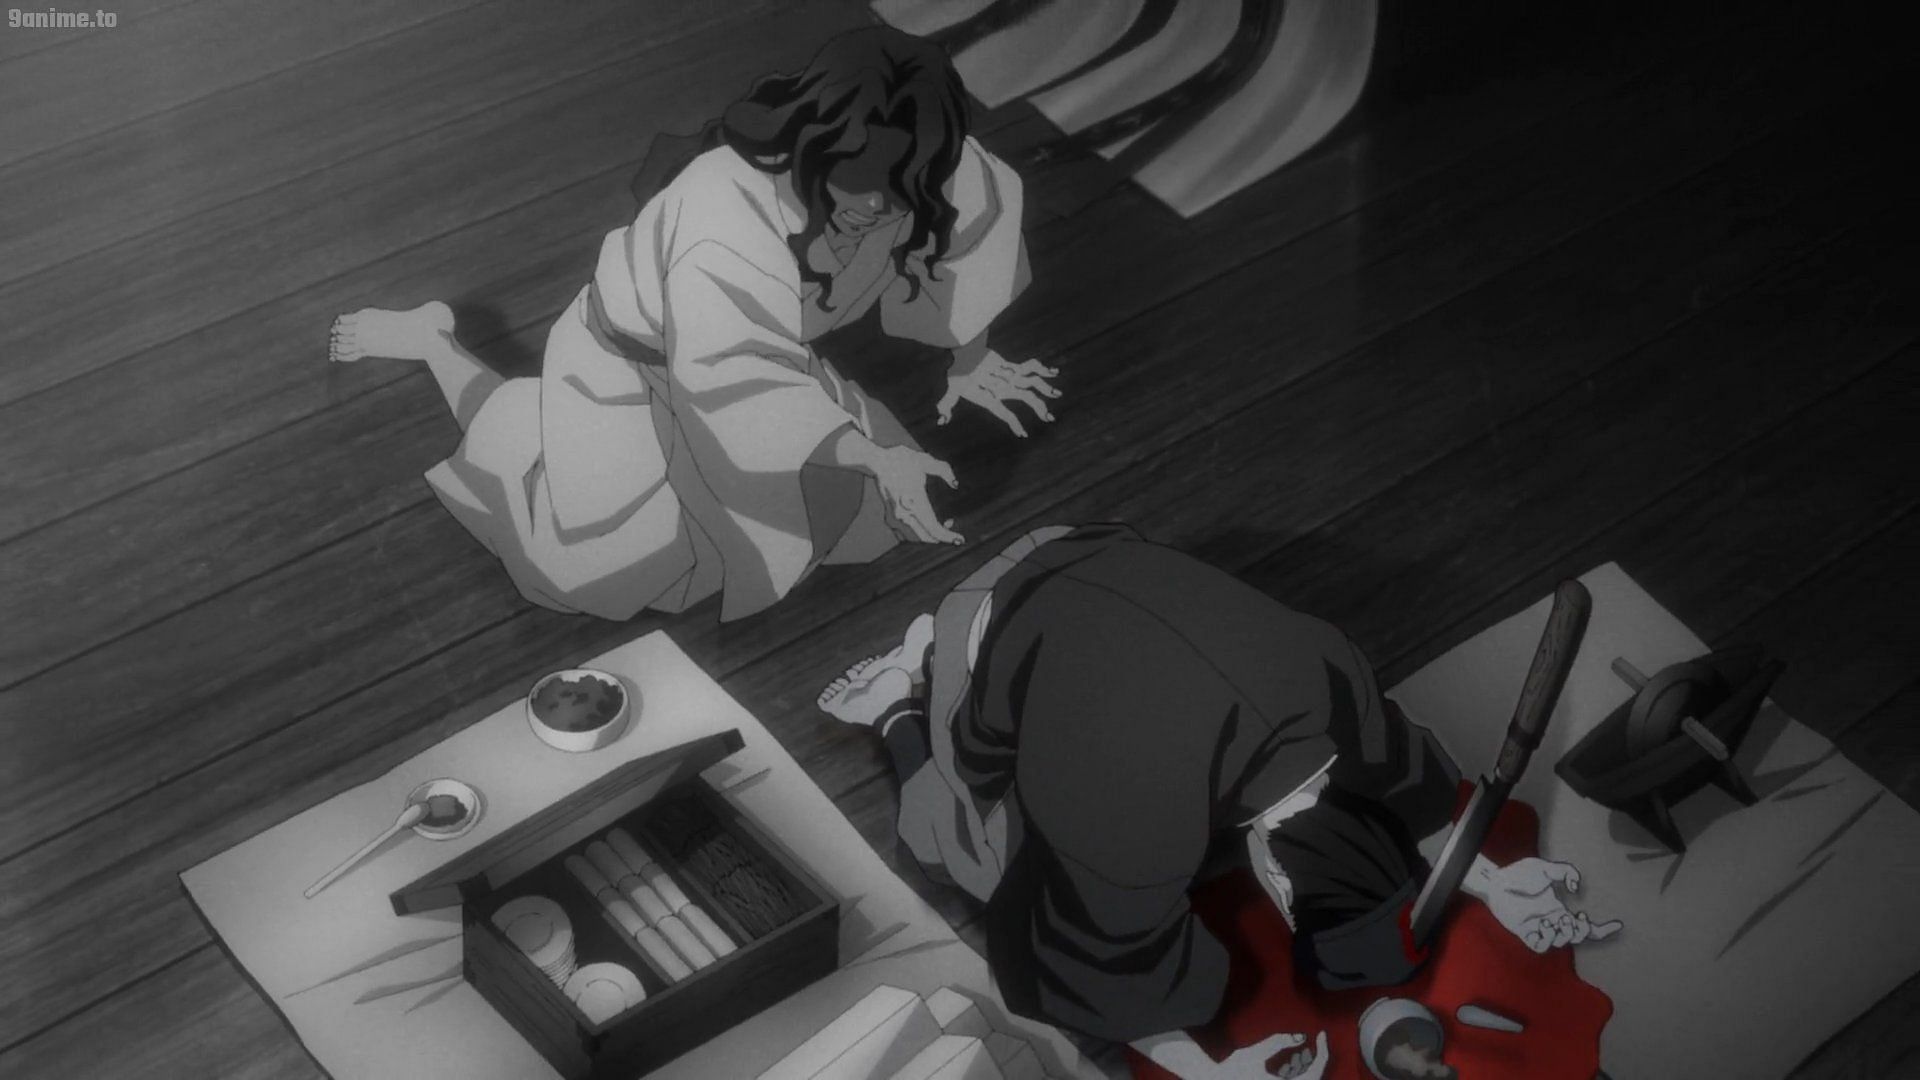 Muzan killed his doctor when he was being treated for his illness (Image via Ufotable)